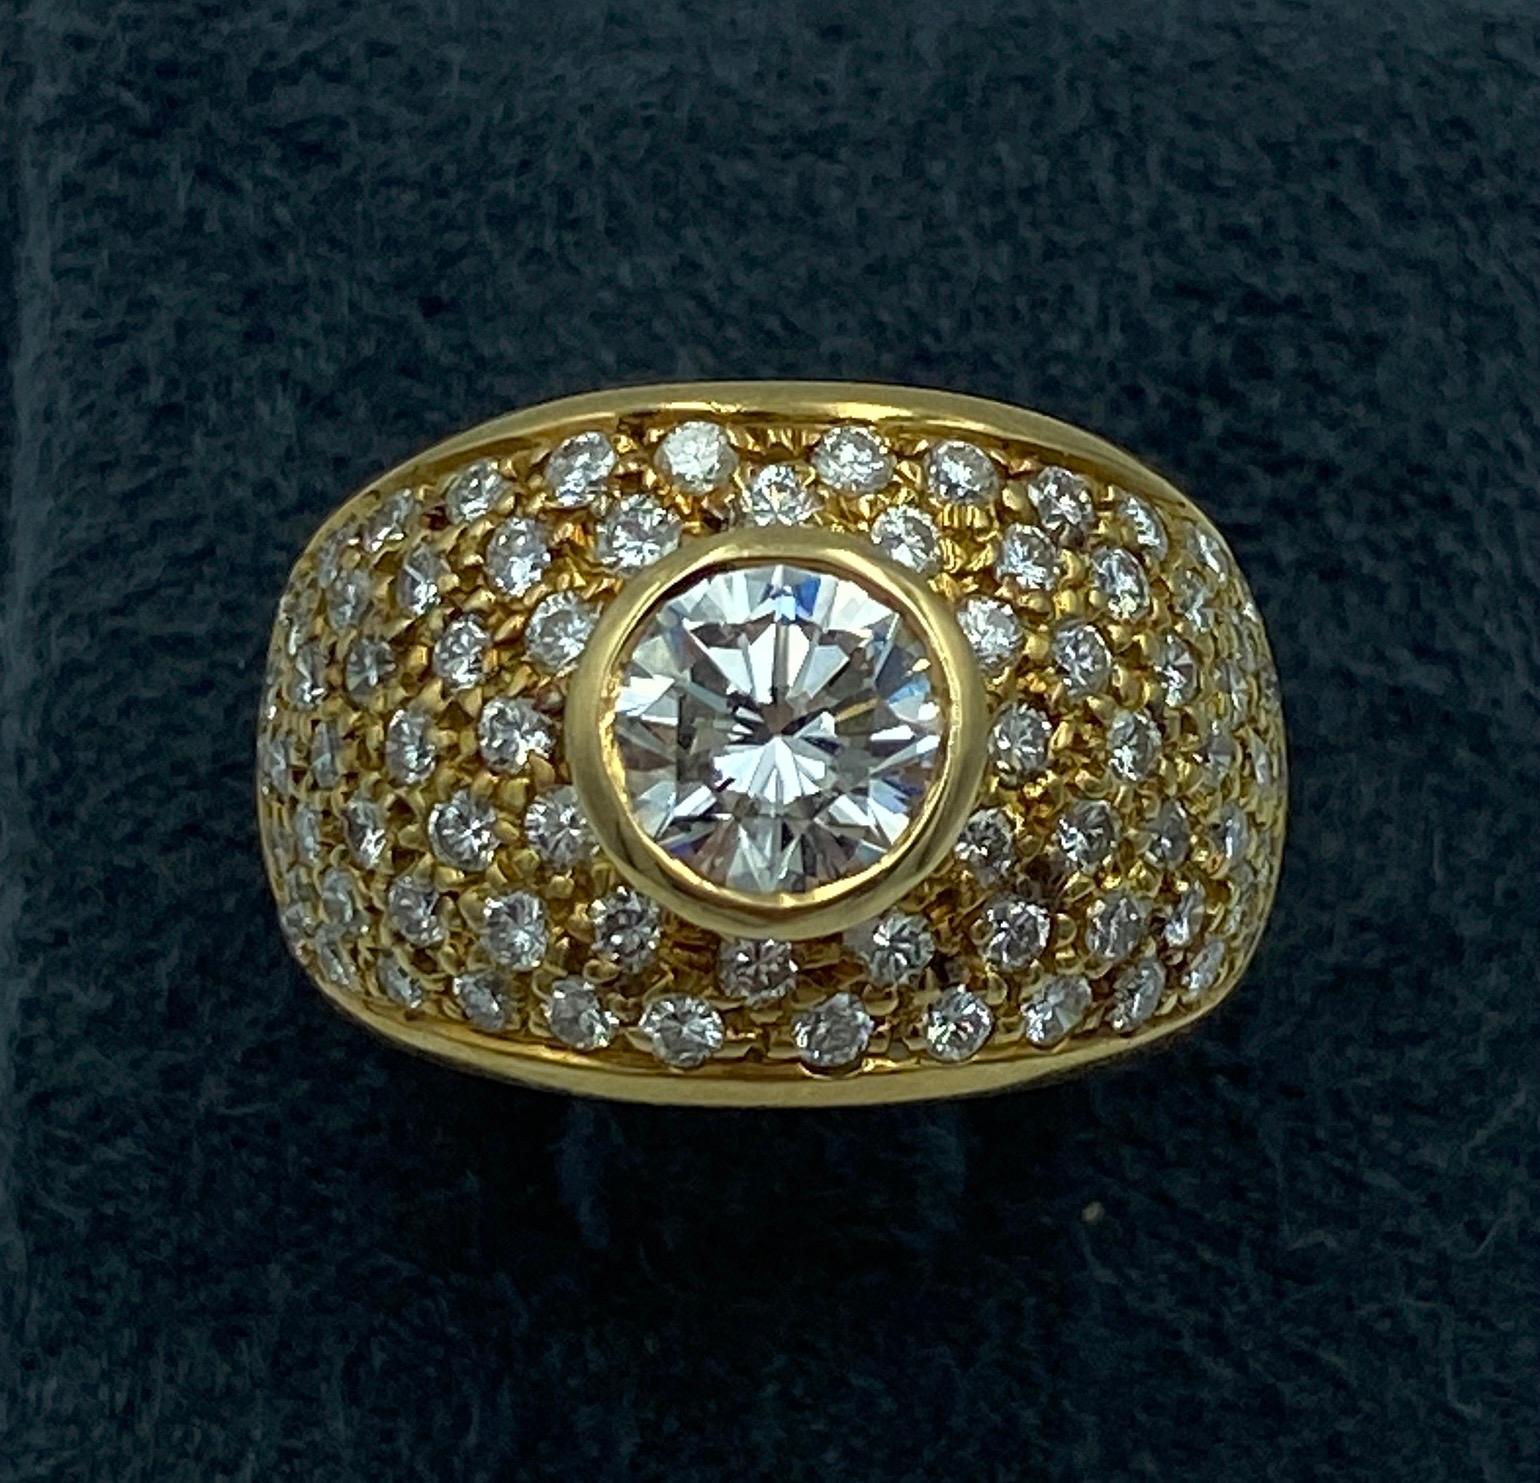 A stunning Italian made 1990s dome cocktail ring consisting of a round cut centre diamond of approximately 0.9 carat and 75 small diamonds of approximately 2.25 carats. Made of 18 carat gold, it is a beautiful piece which you will not want to take